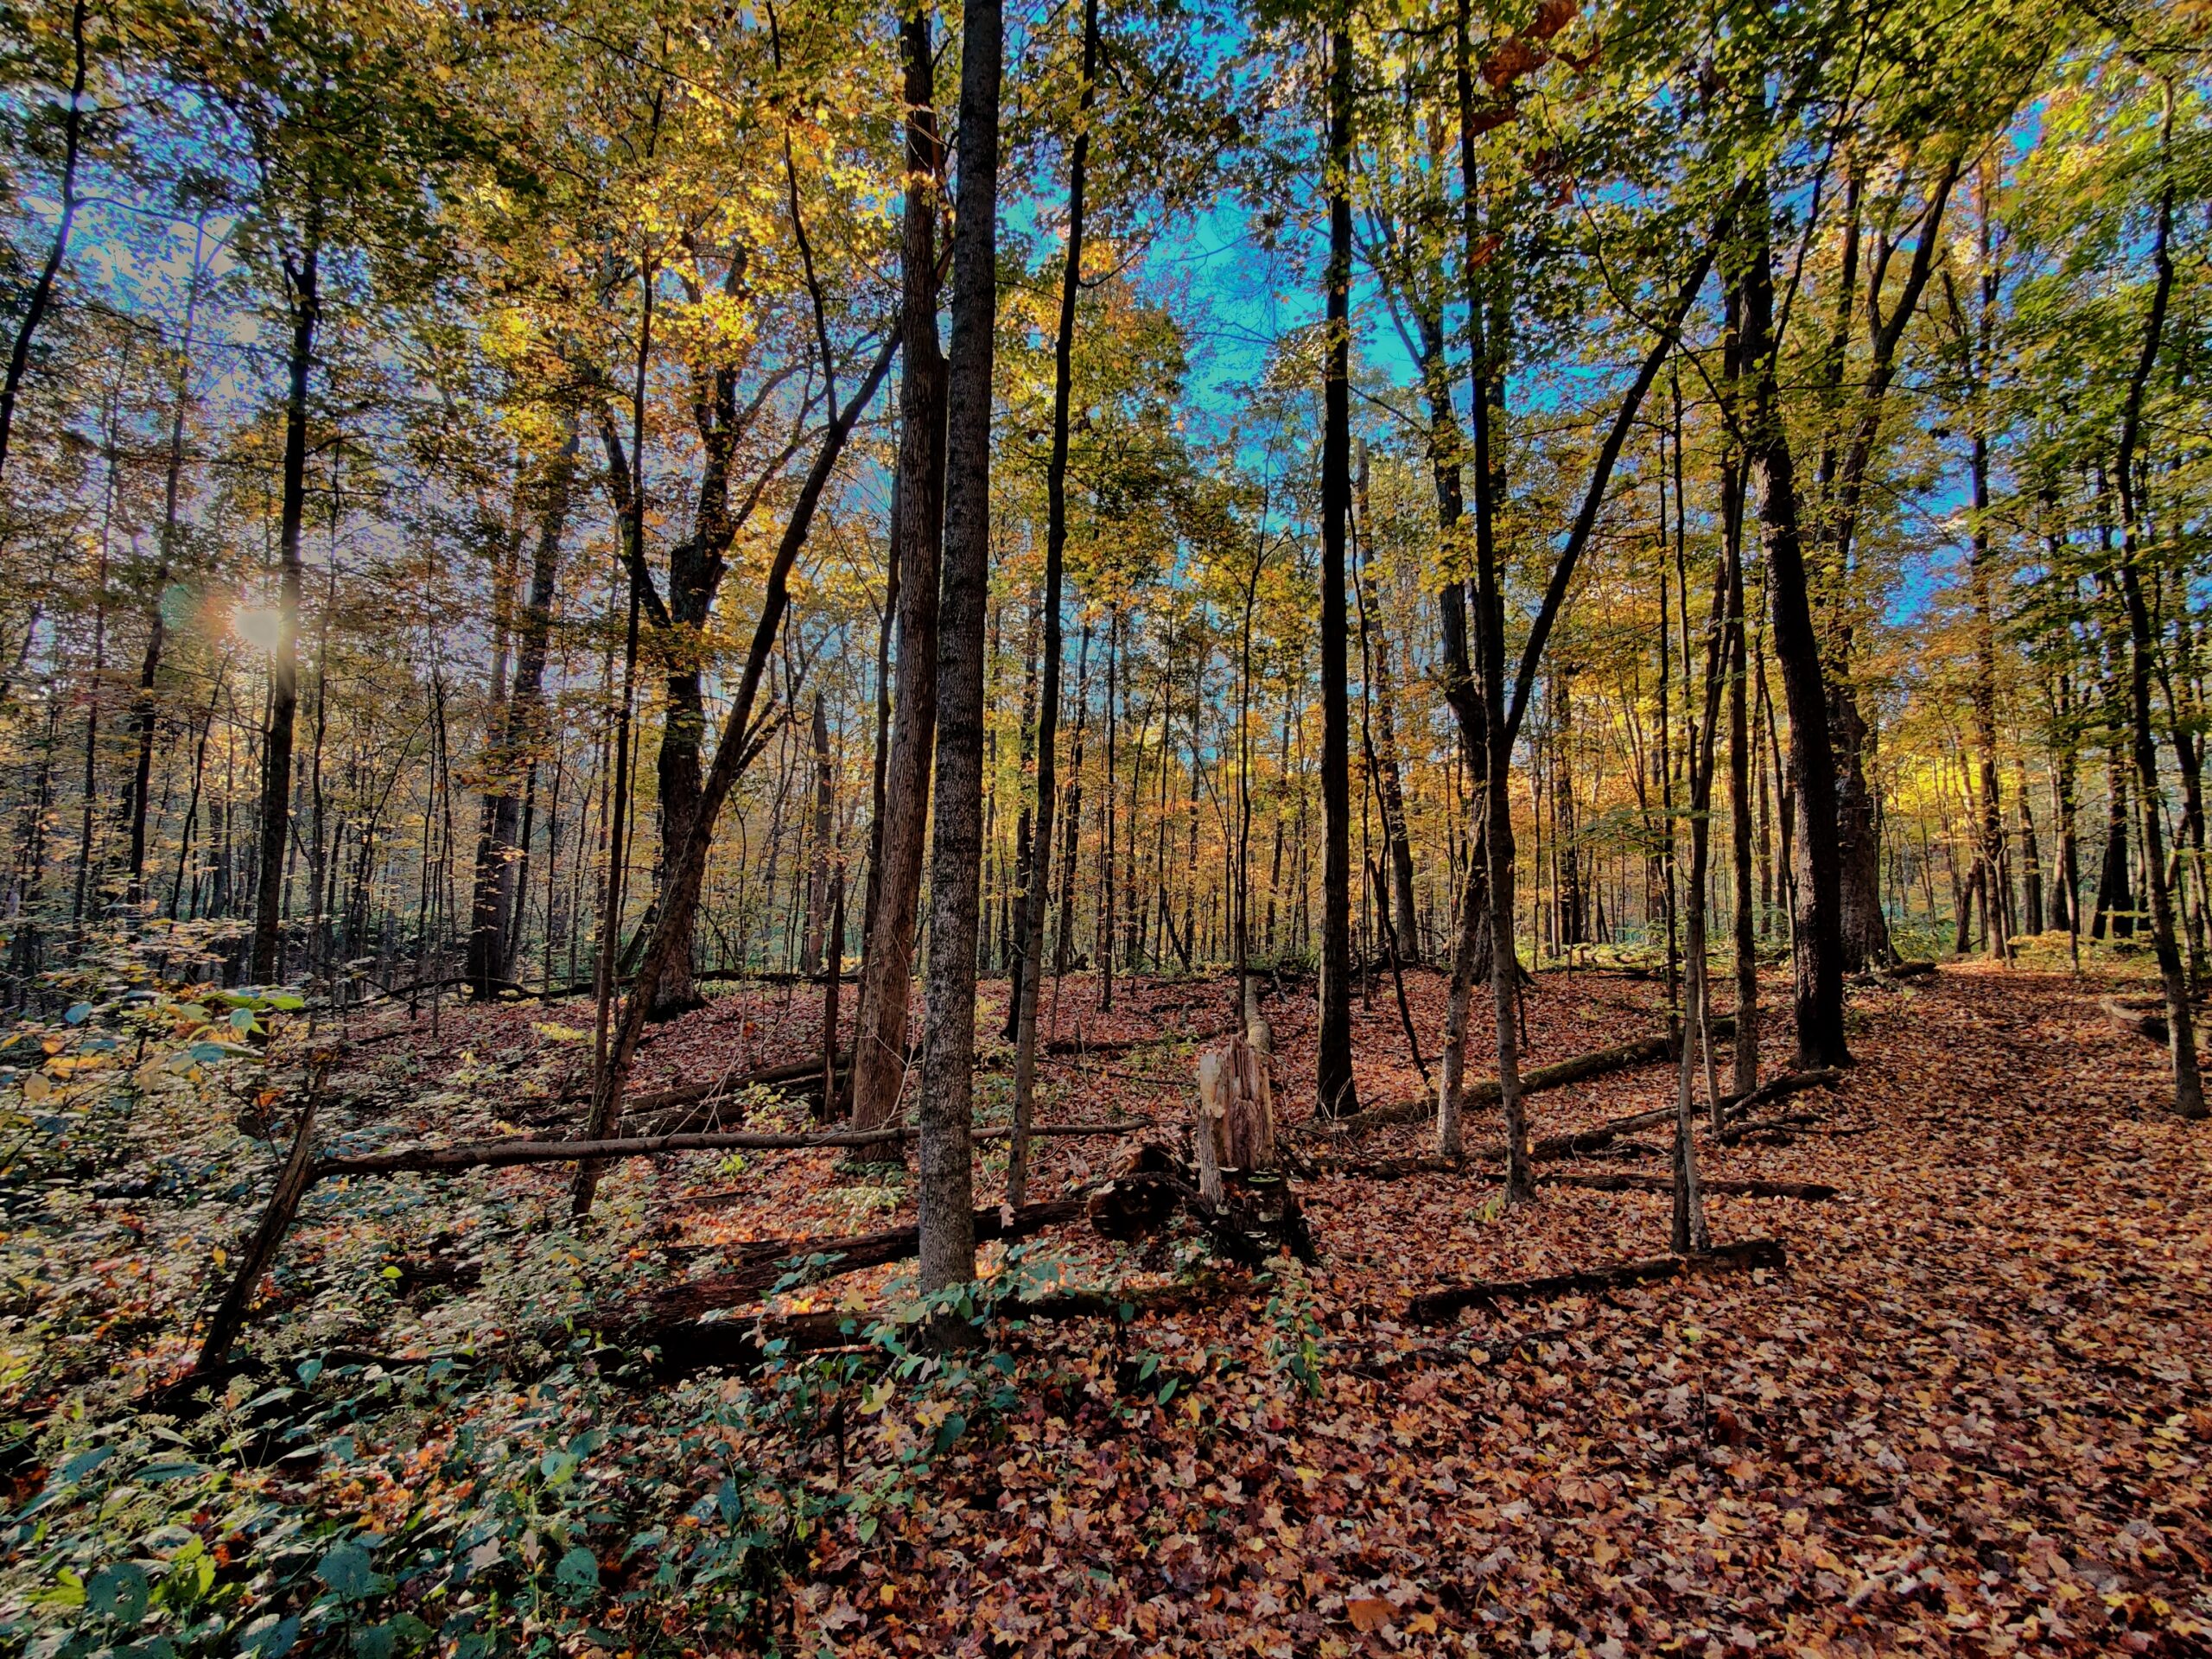 A pretty fall day in the squirrel woods.